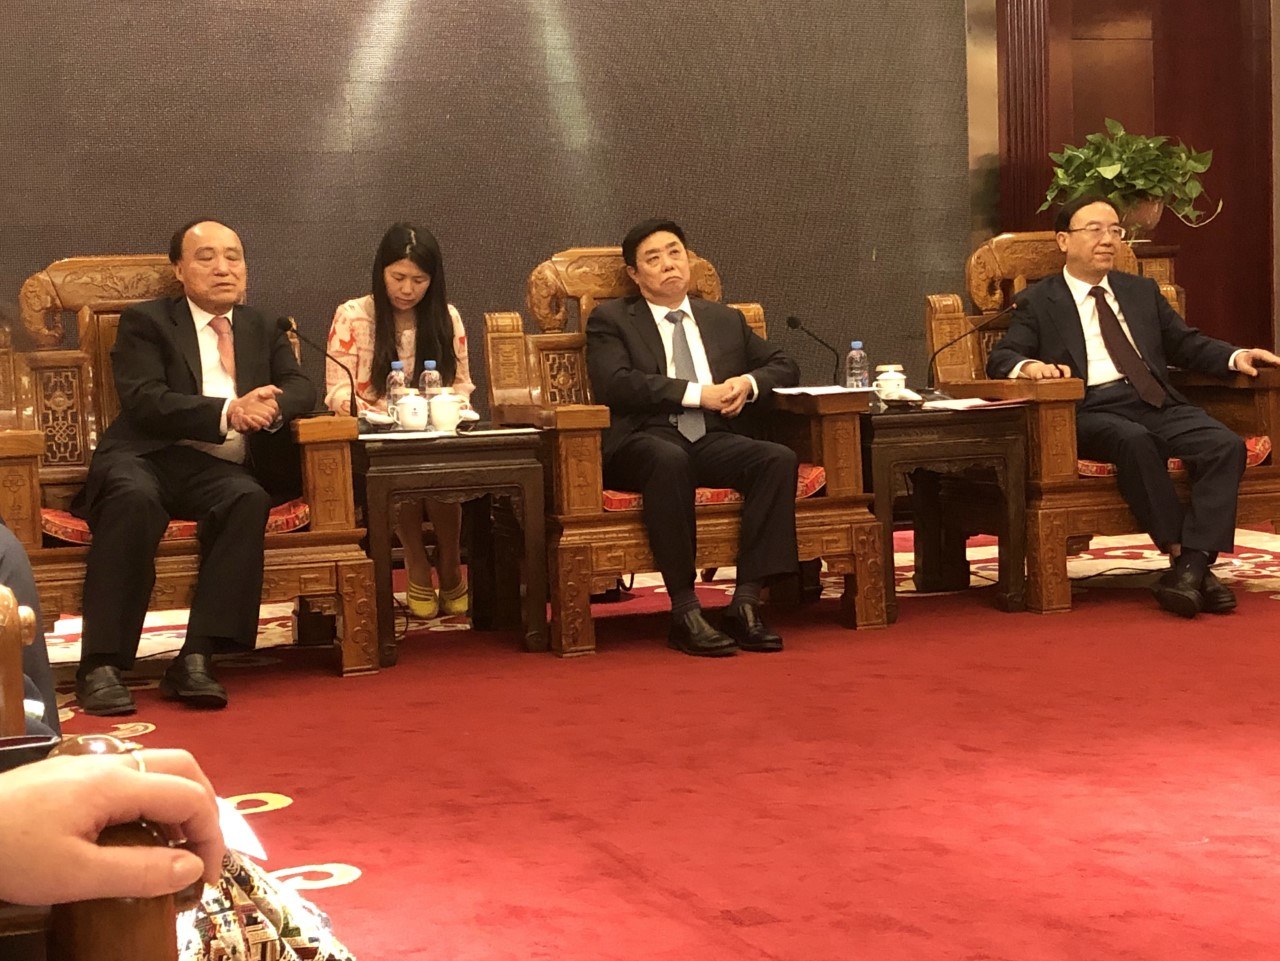 China - Dunhuang Workshop on “Universal Service and ICT for Poverty Alleviation” Jul31-Aug03, 2019